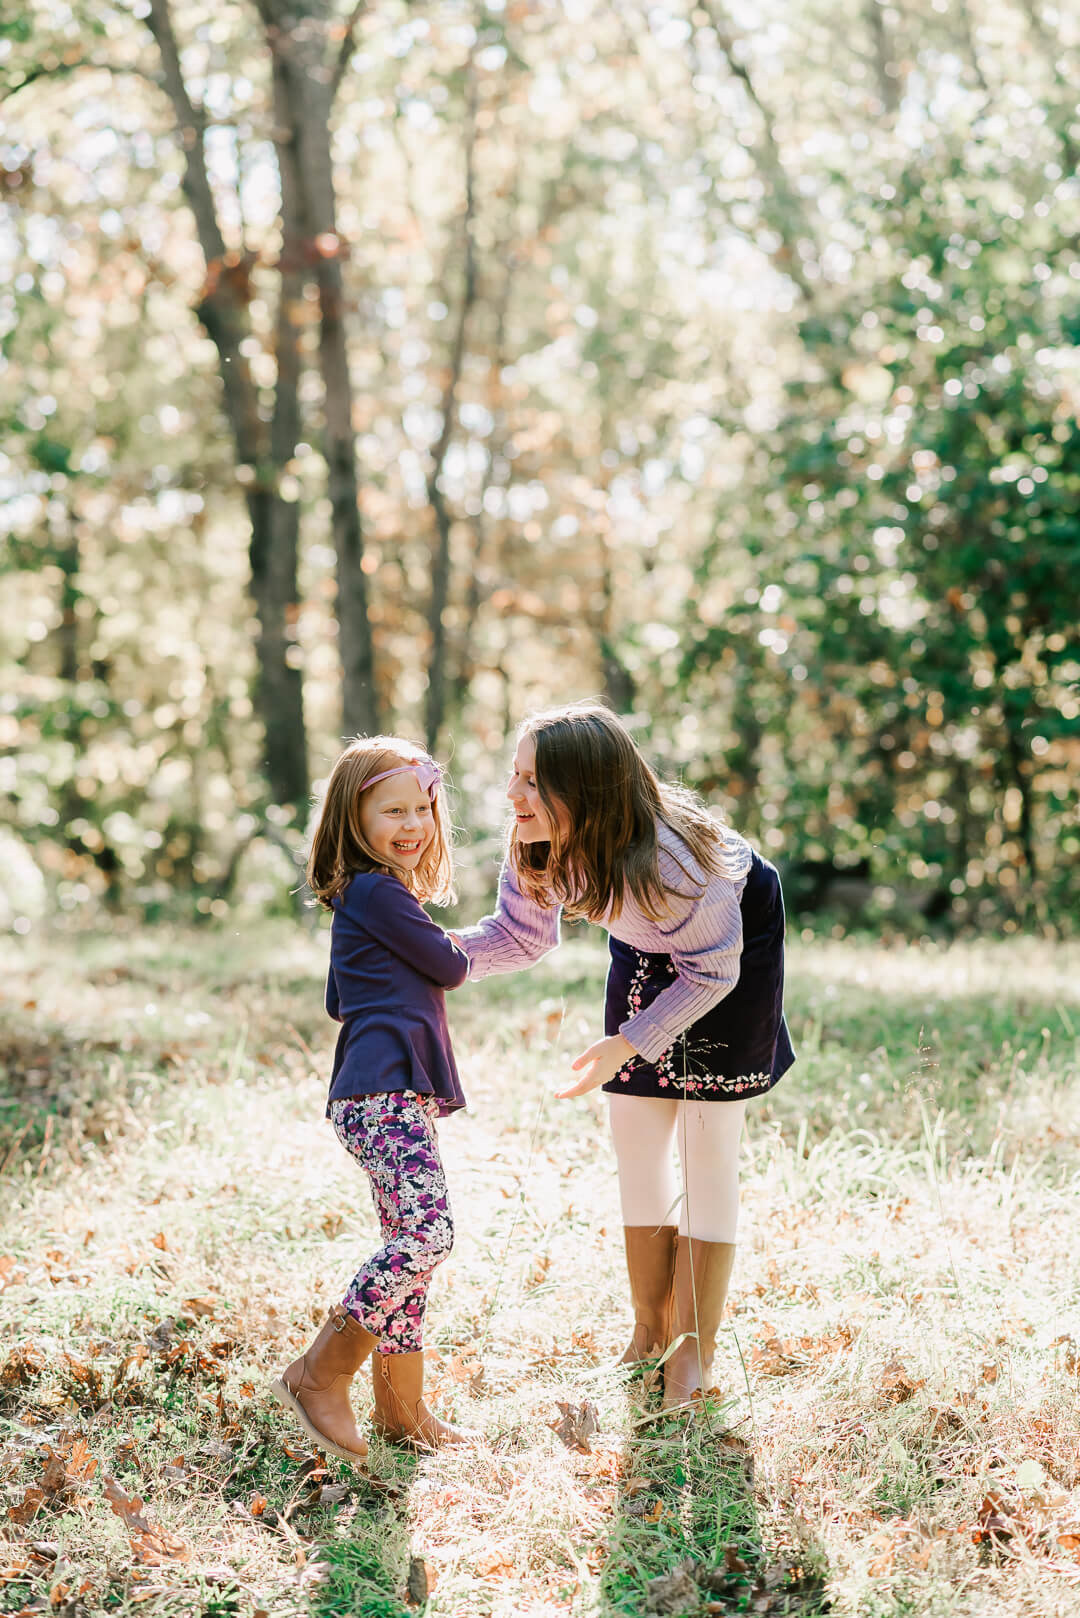 A young girl plays with her little sister in a forest wearing purple